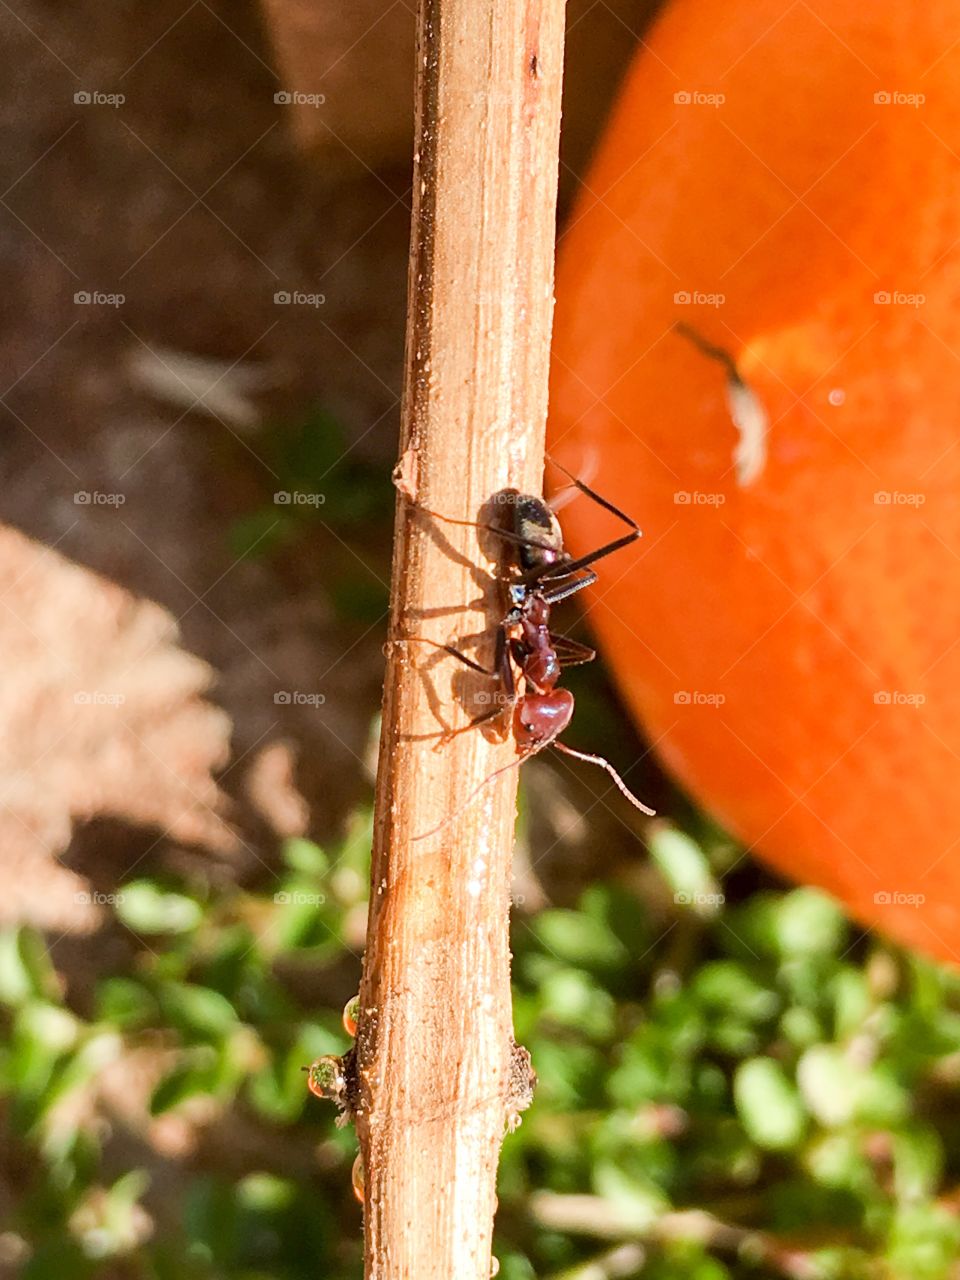 Large worker ant climbing along branch twig